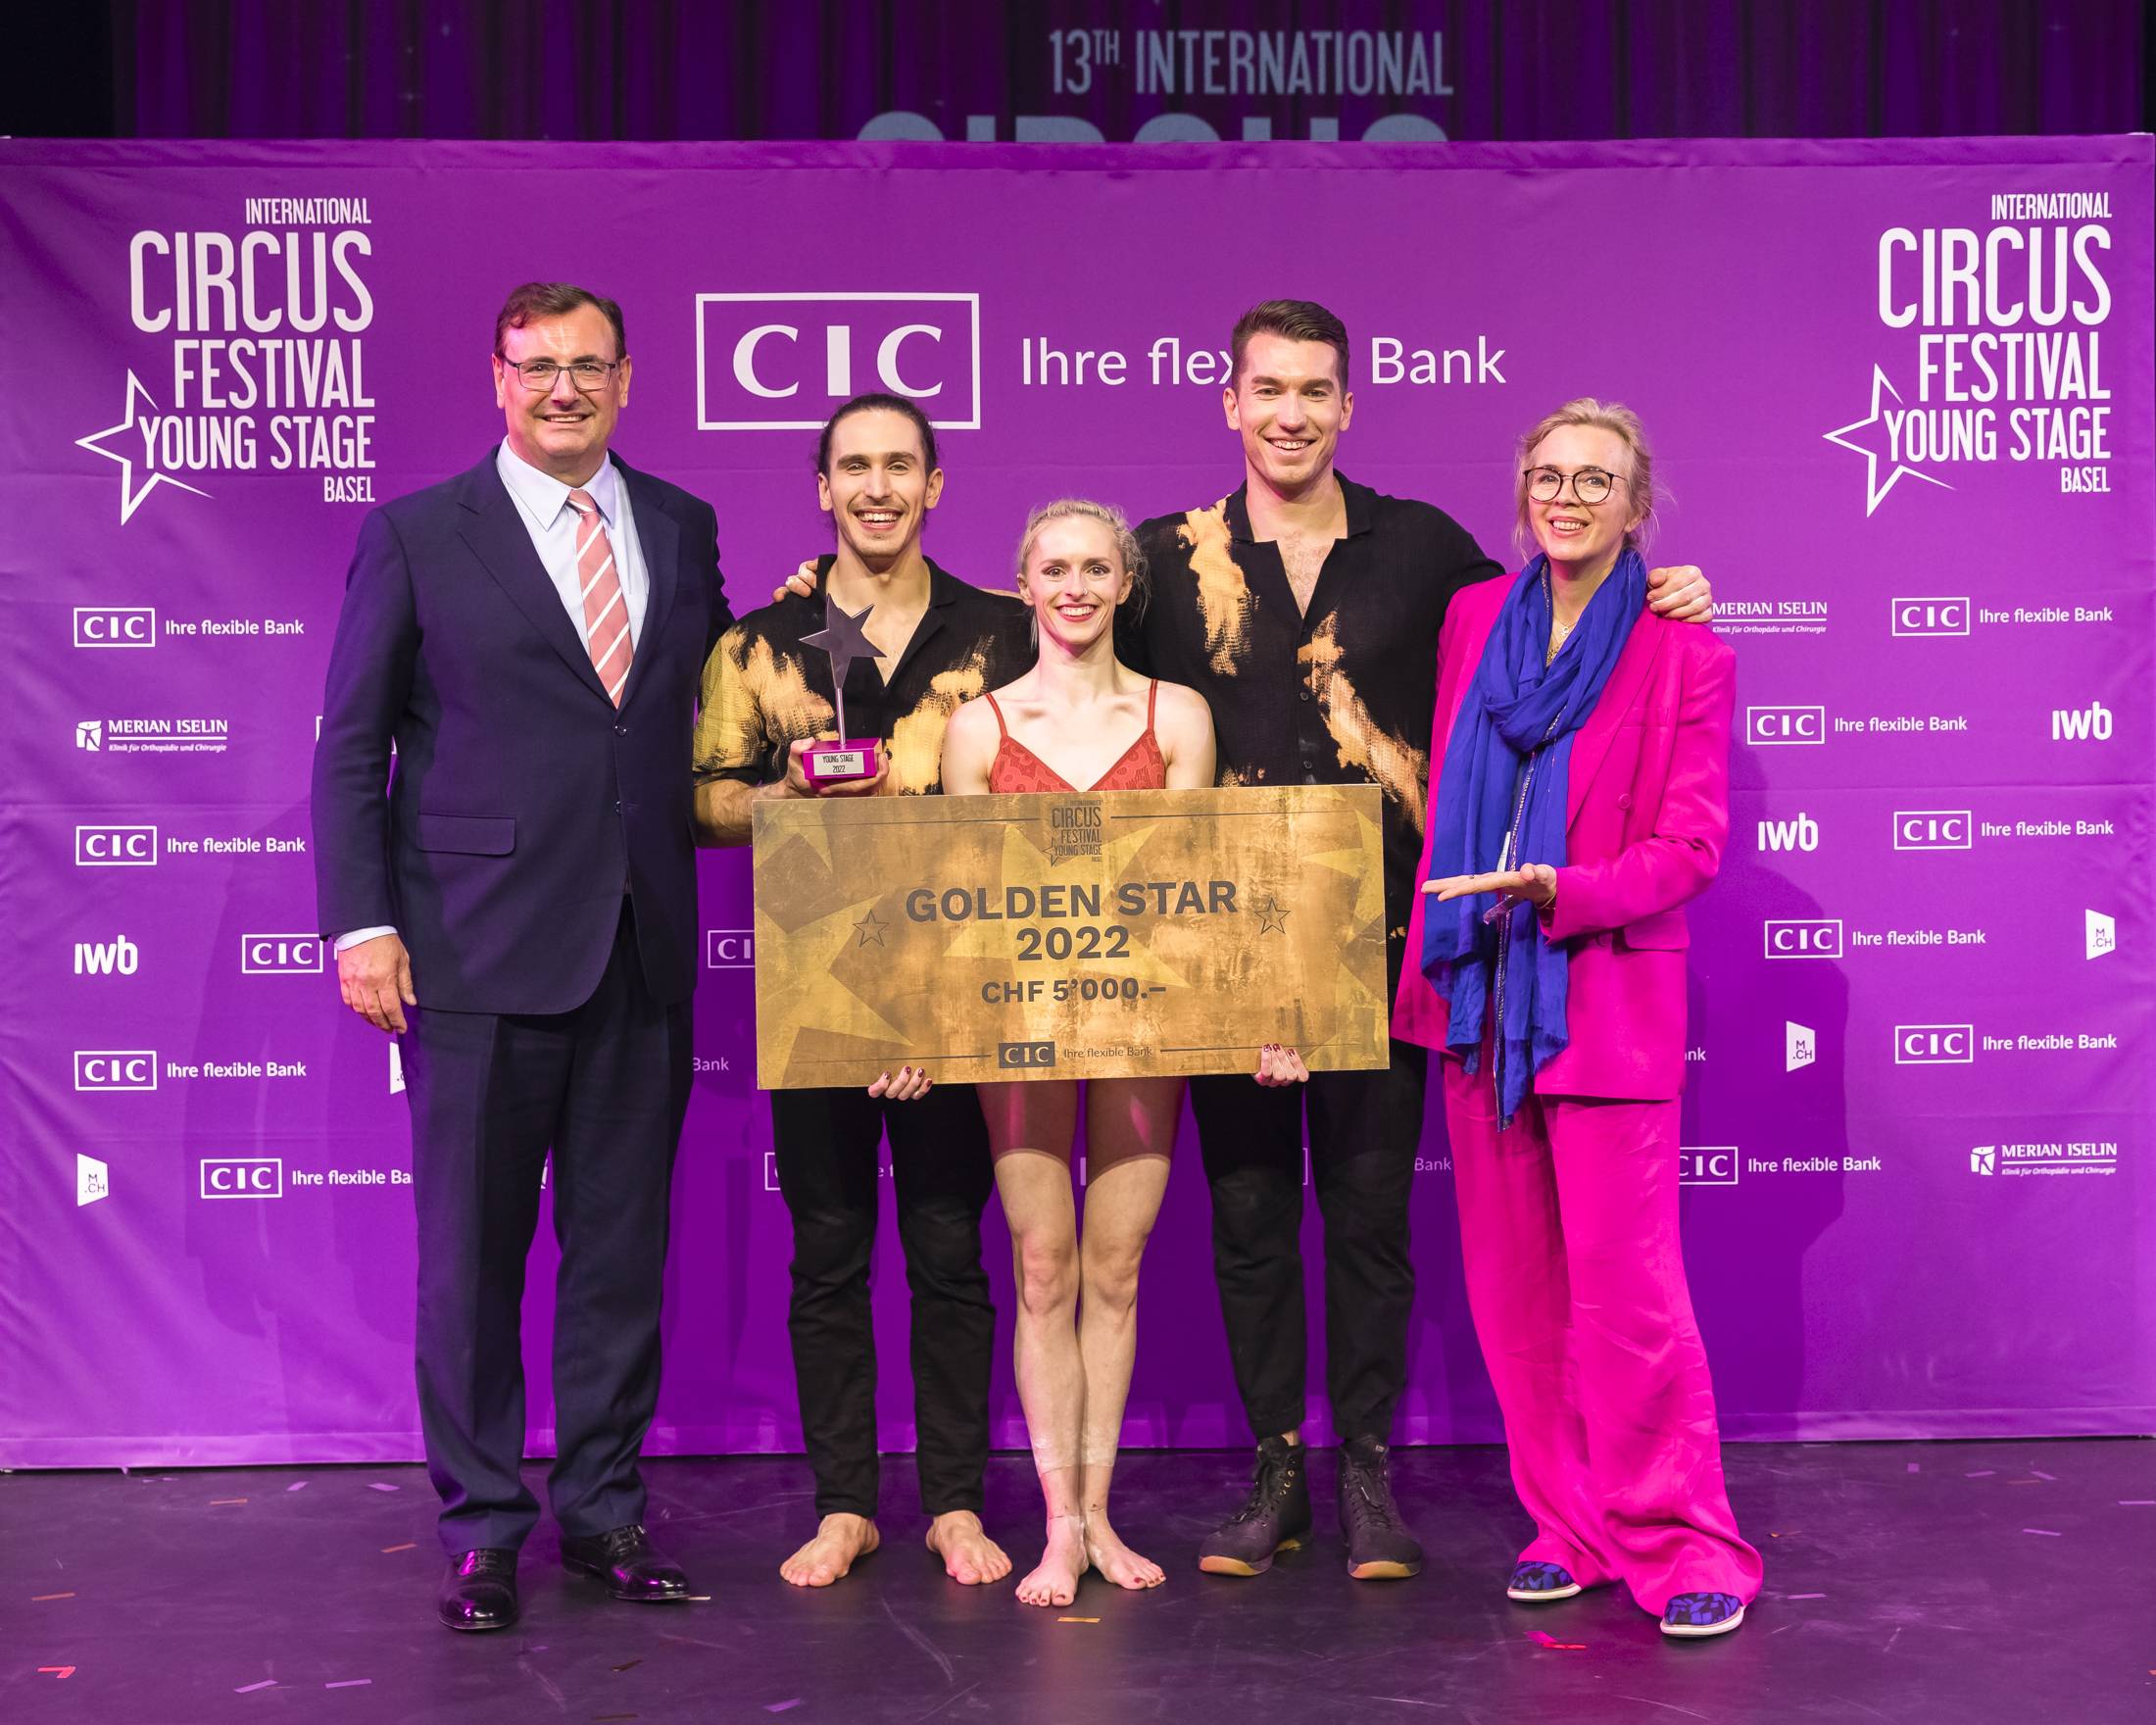 These are the winners of the 13th International Circus Festival YOUNG STAGE Basel 2022